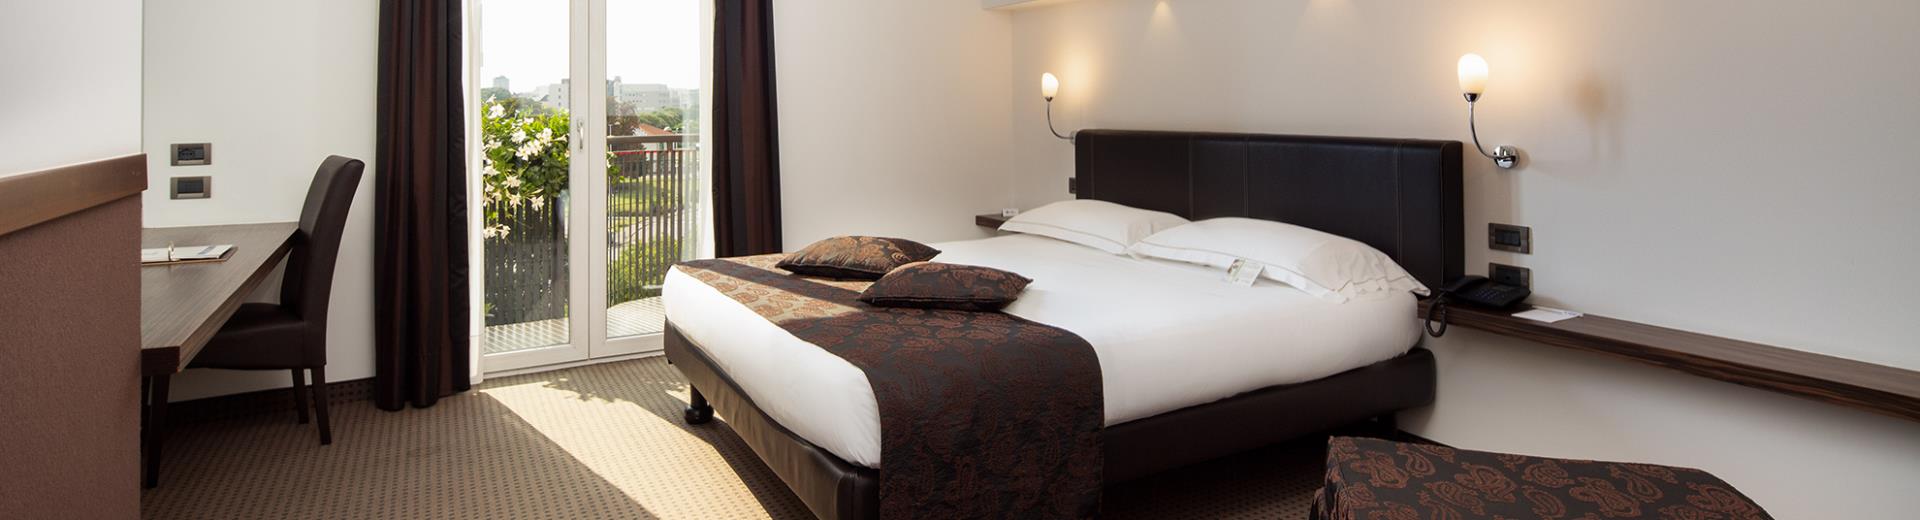 Enjoy all the comfort of our Double Superior rooms: book Hotel Biri, modern 4 stars in Padua!